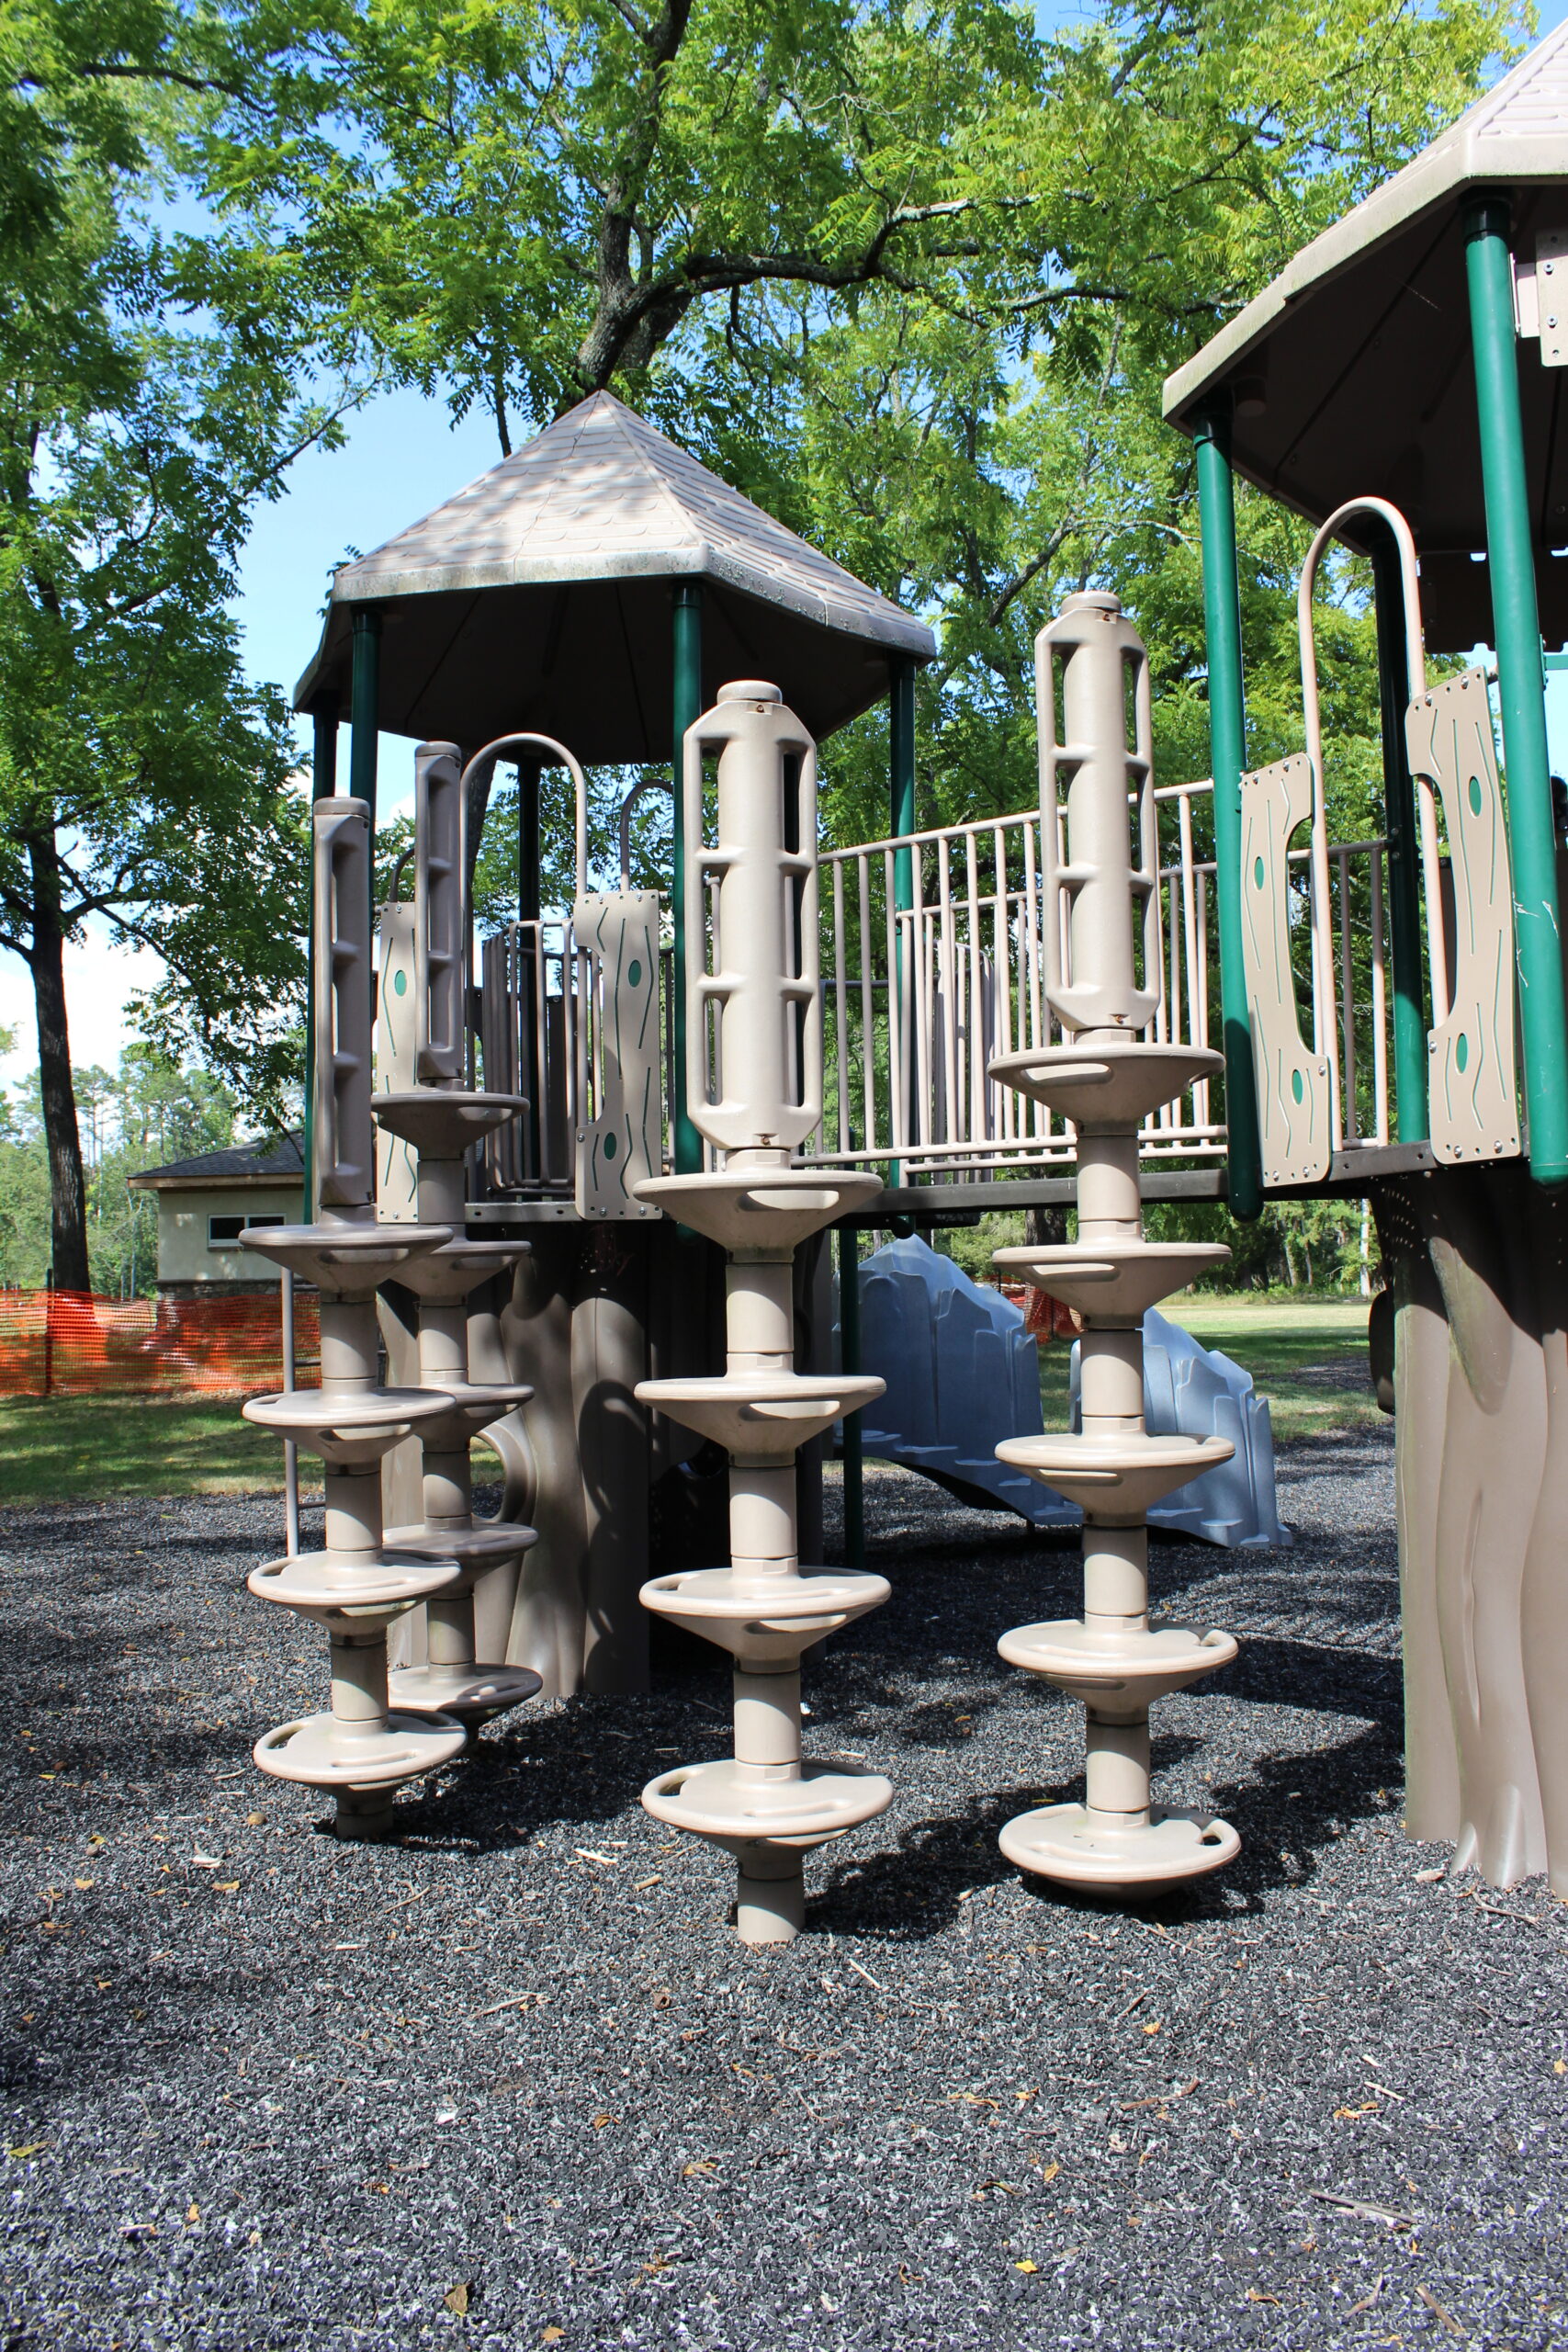 Back Estell Manor Park Playgrounds in Mays Landing NJ - Feature - climbing ladder on treehouse playgroound